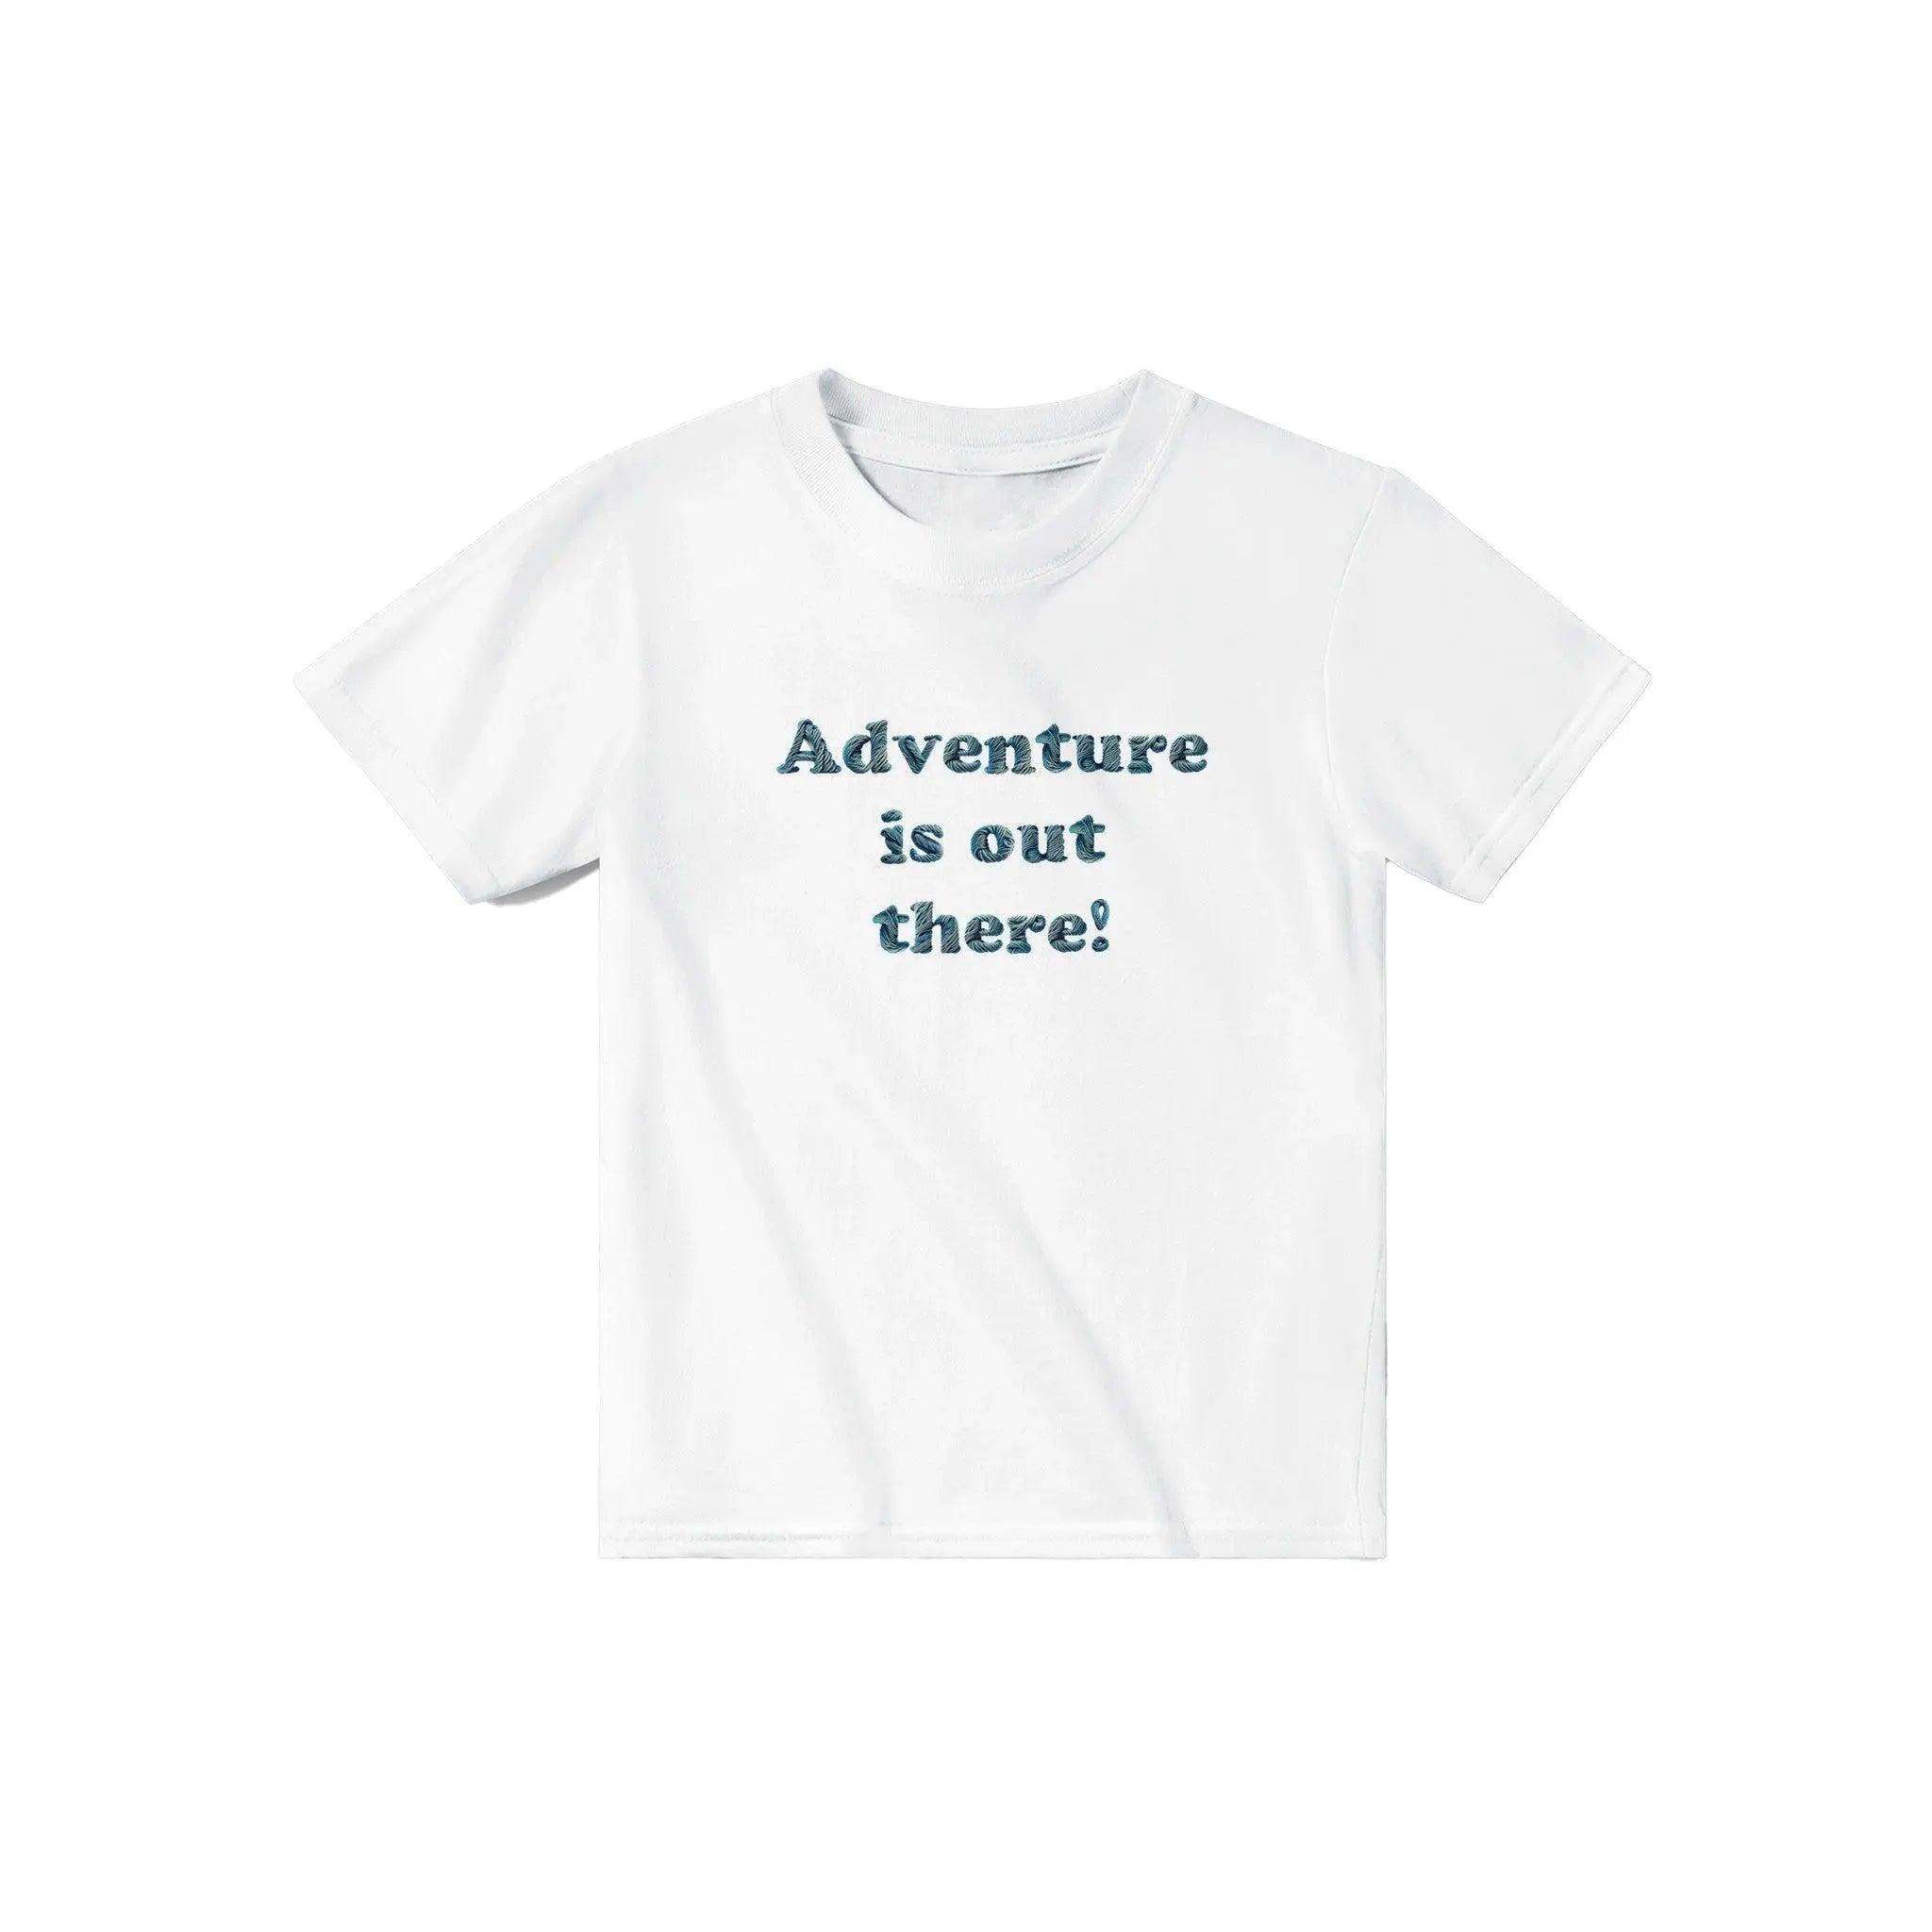 'Adventure is out there' Baby Tee - POMA